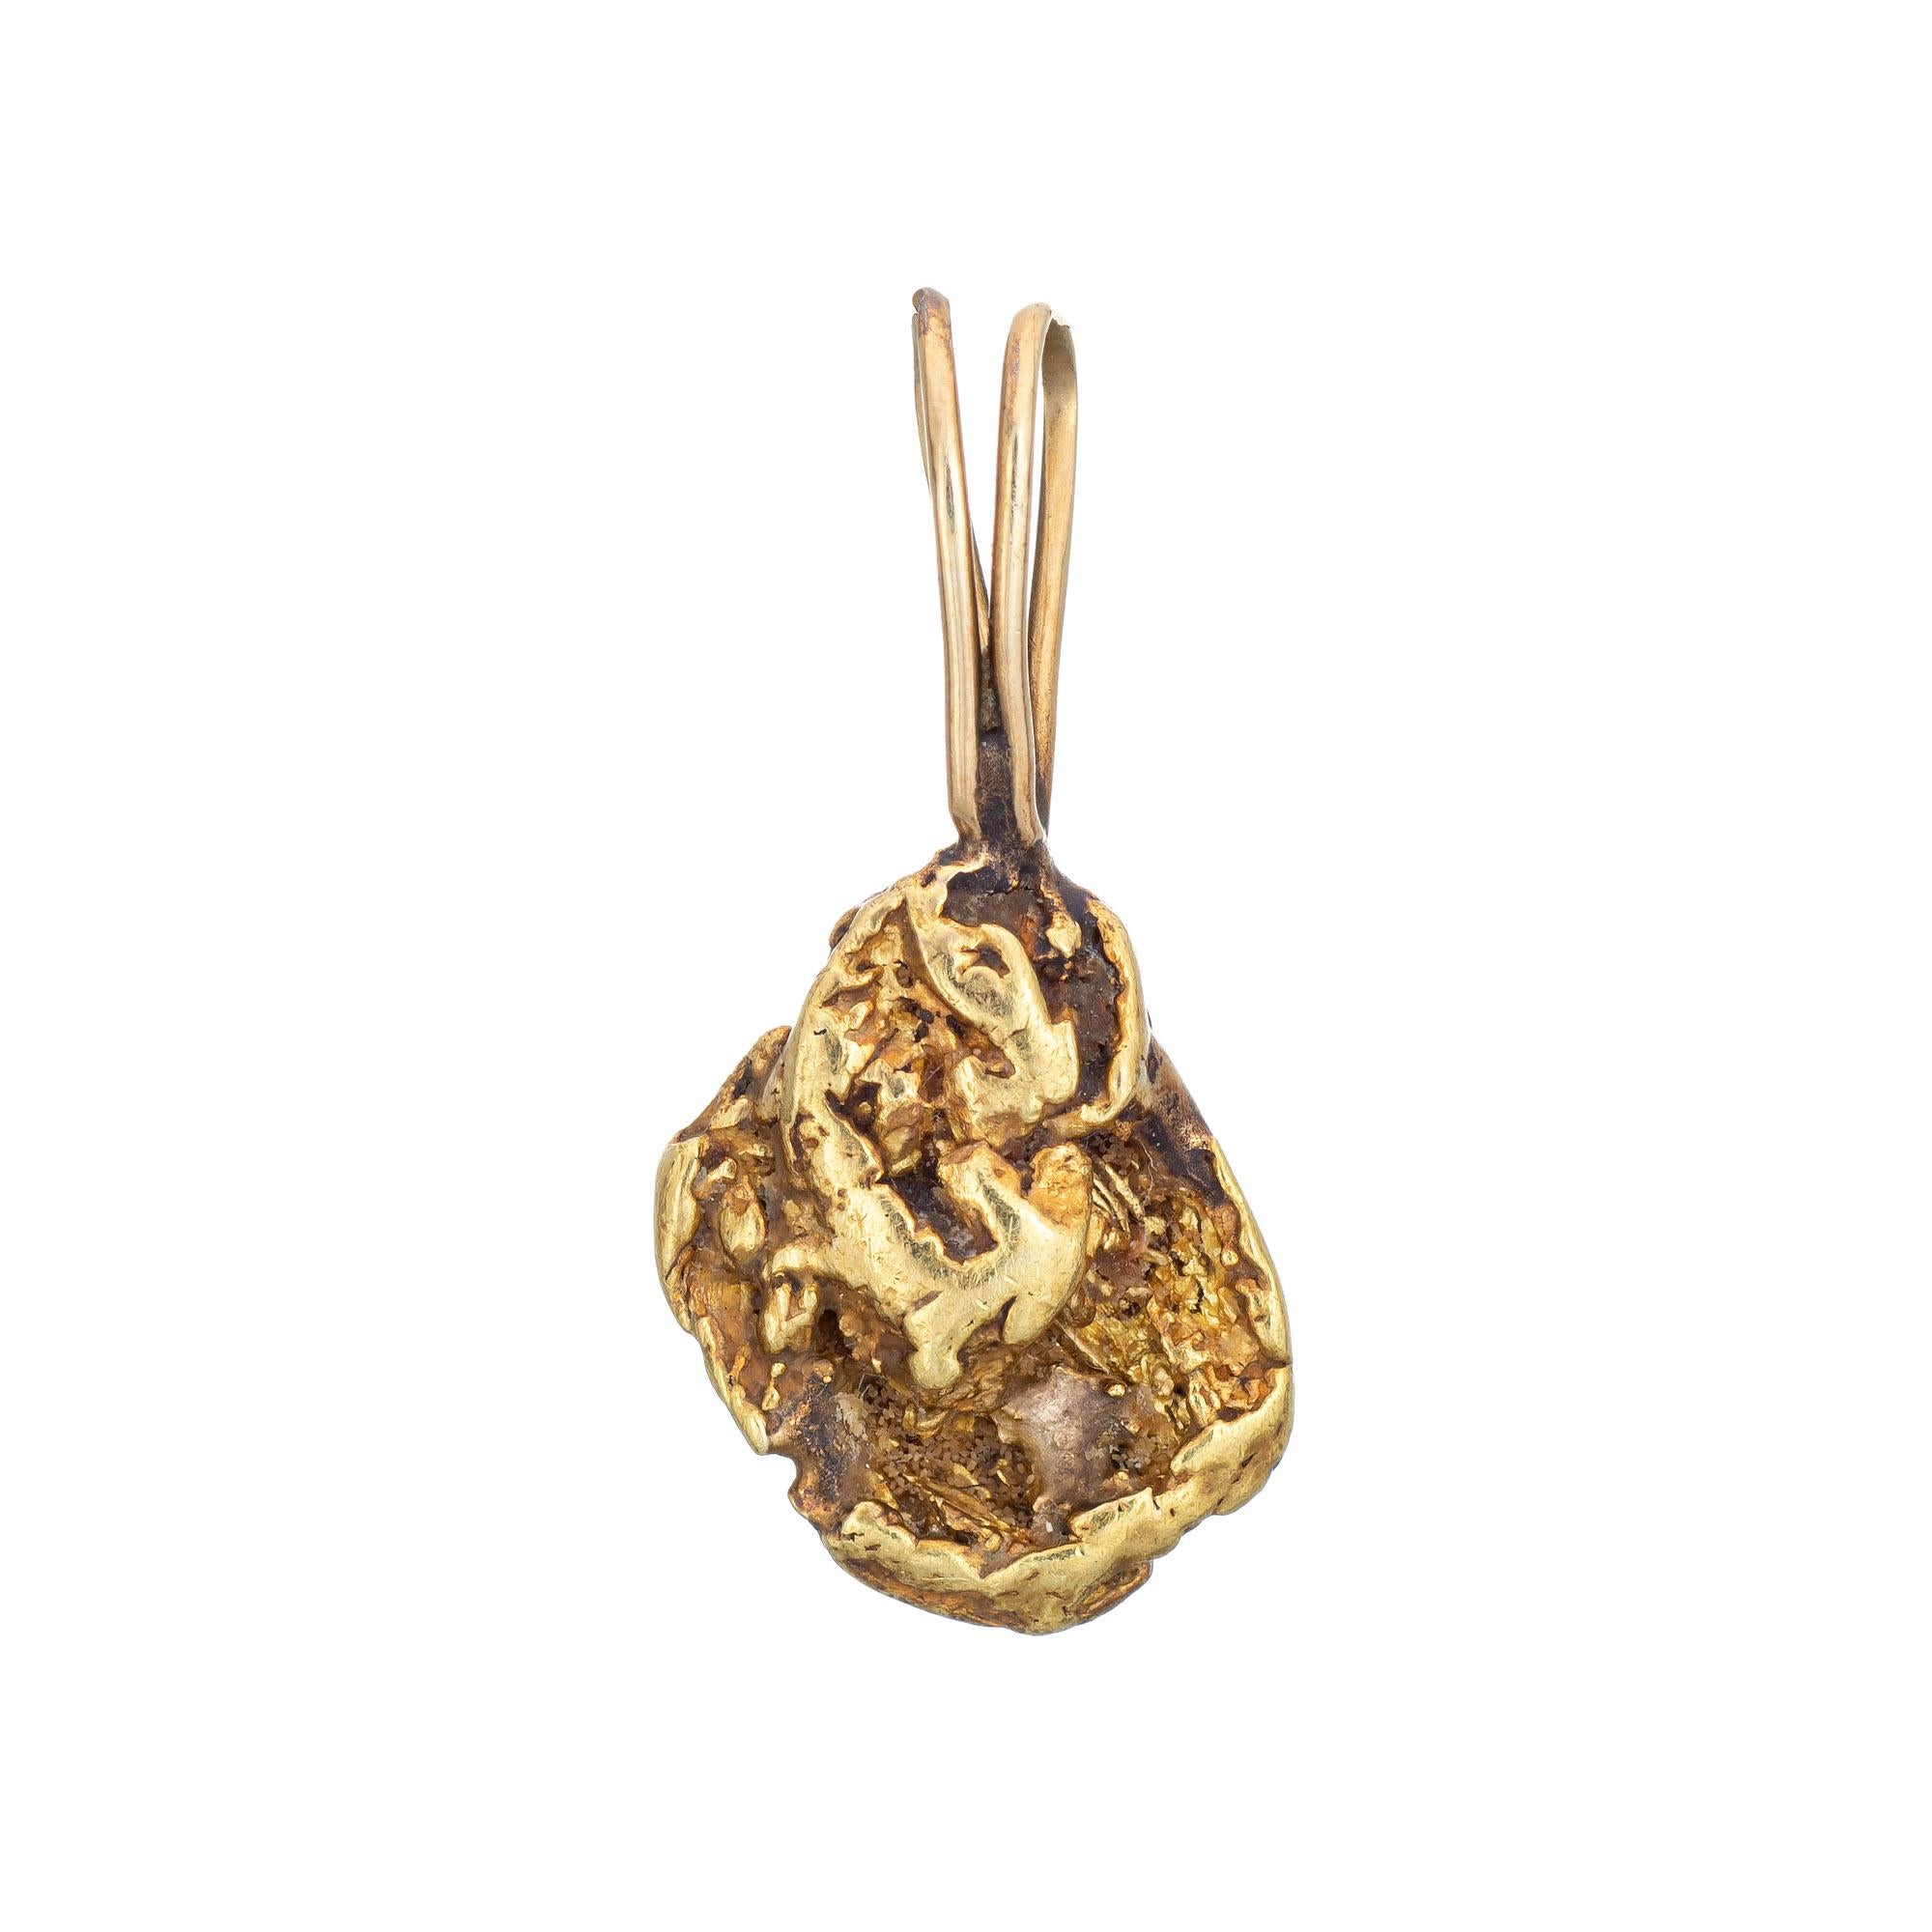 Natural gold nugget pendant fitted with a 14k yellow gold bale. 

The natural mined from the earth gold nugget is attached to a 14 karat yellow gold bale. The gold nugget has its own unique organic look with the brightness of buttery 22k to 24k